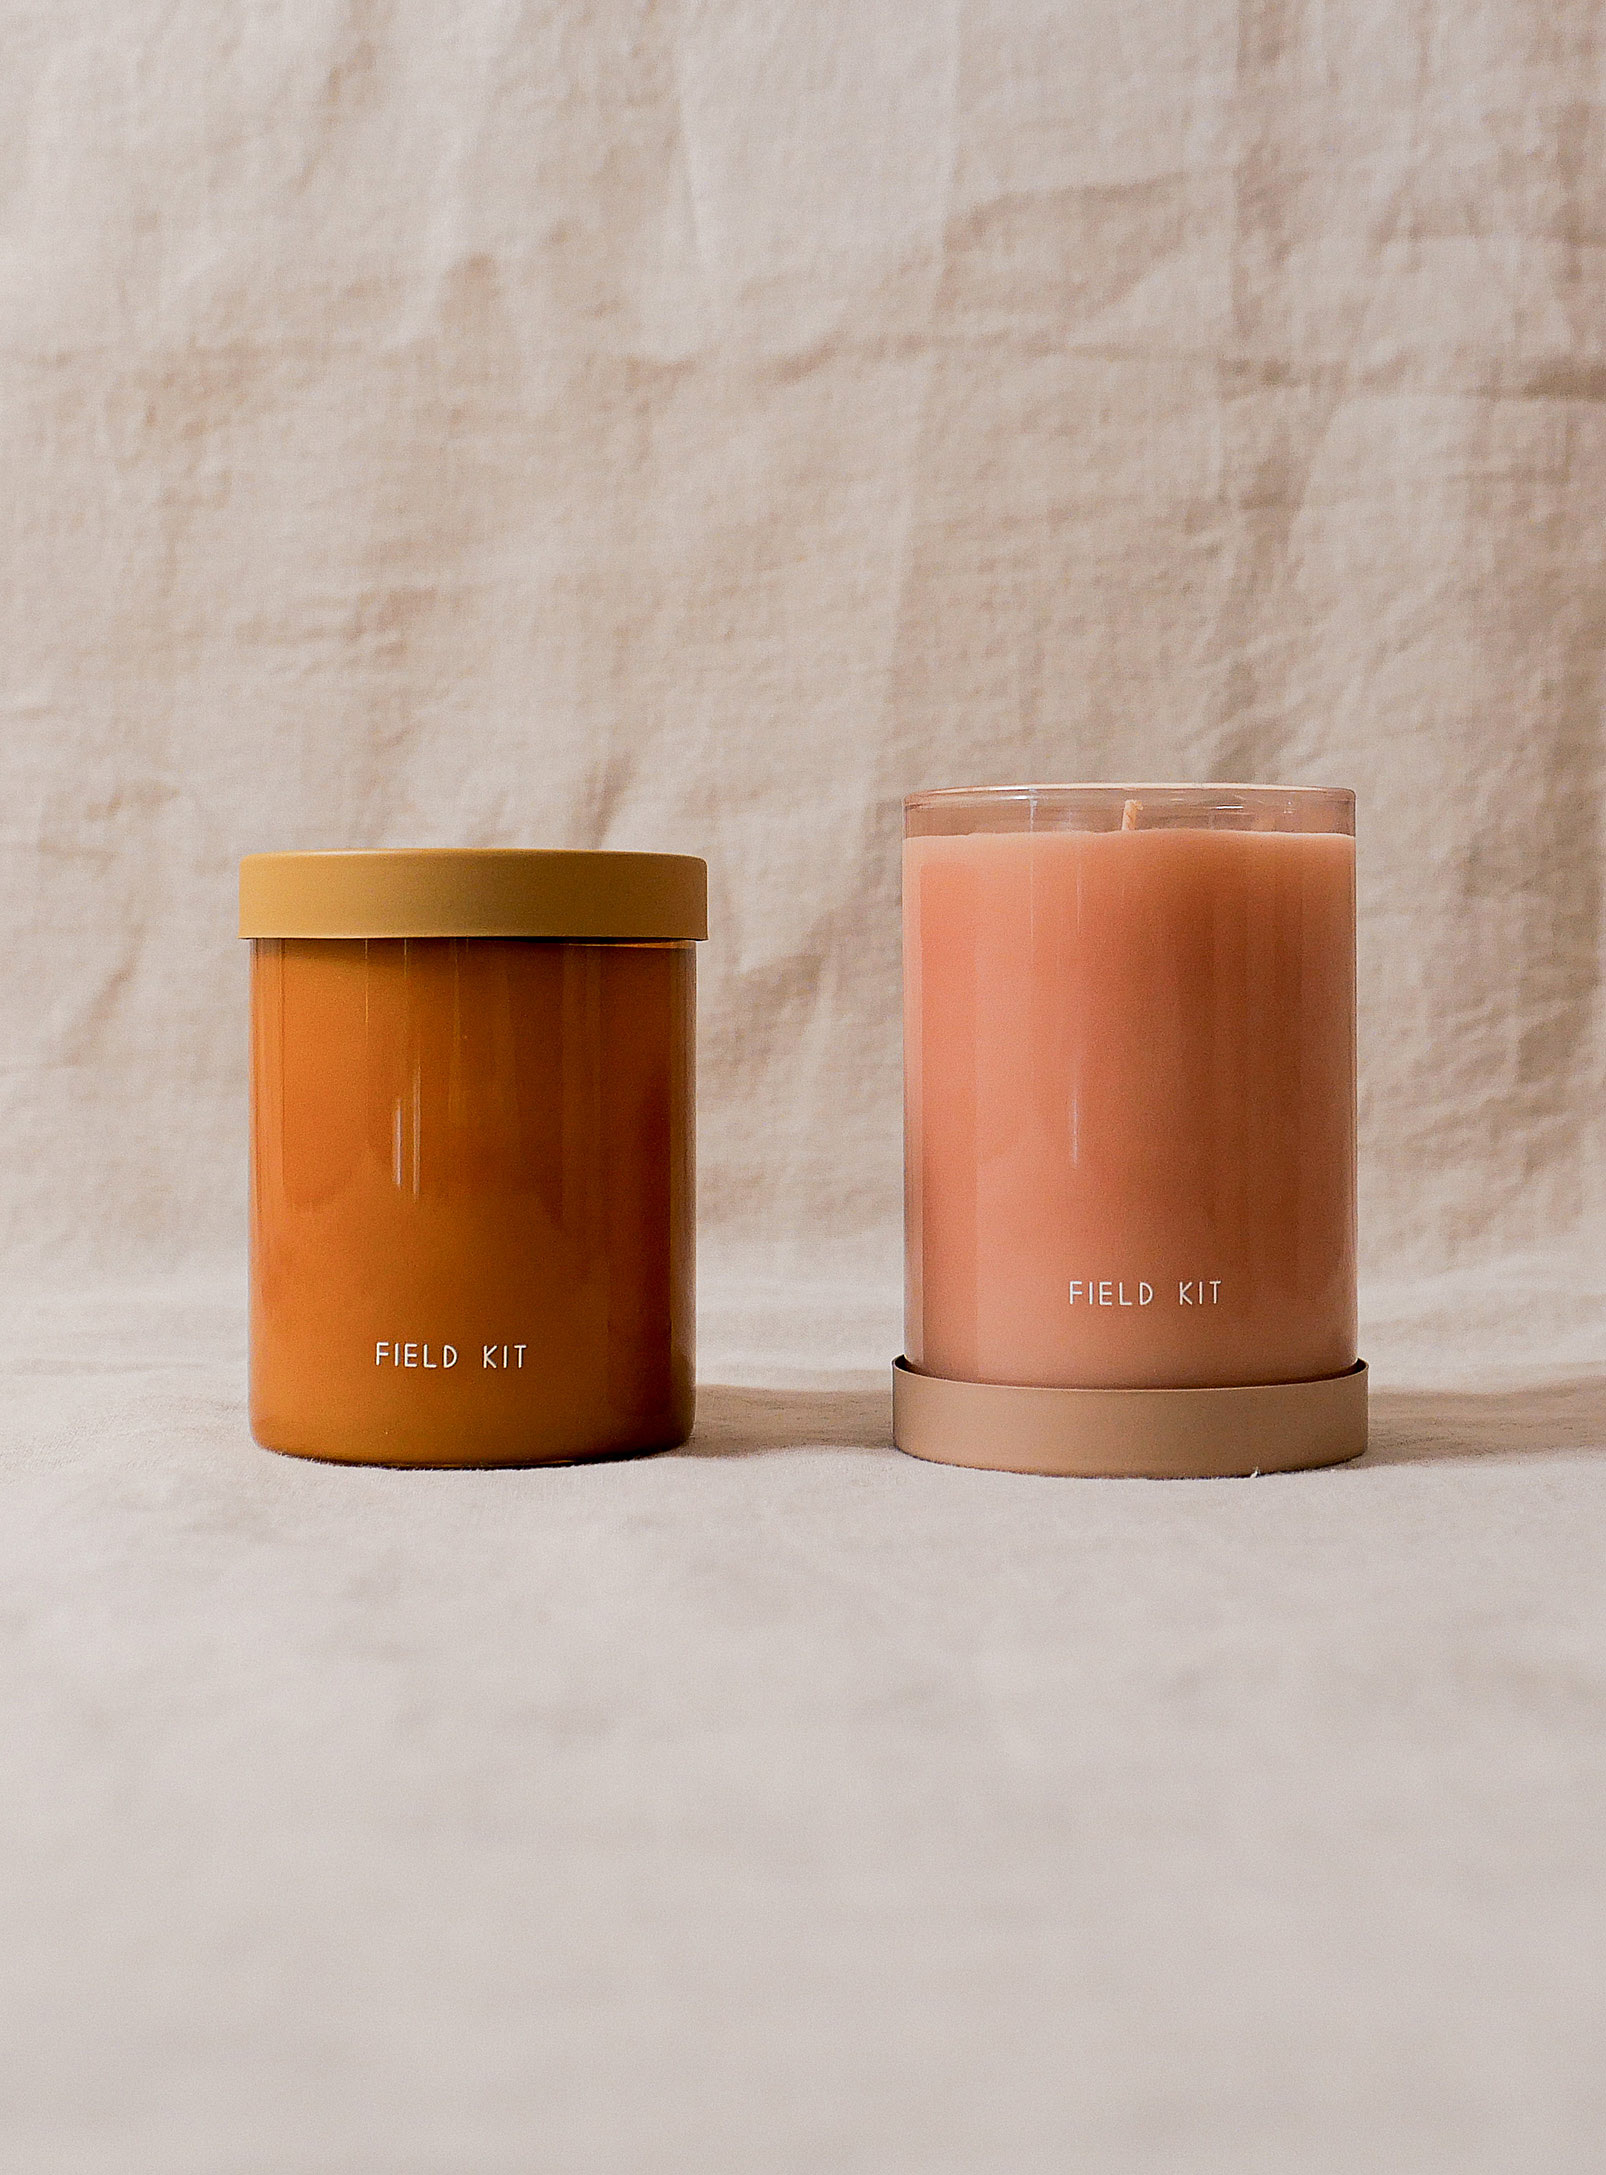 Field Kit - Botanical scented candle set The Solarium and The Florist